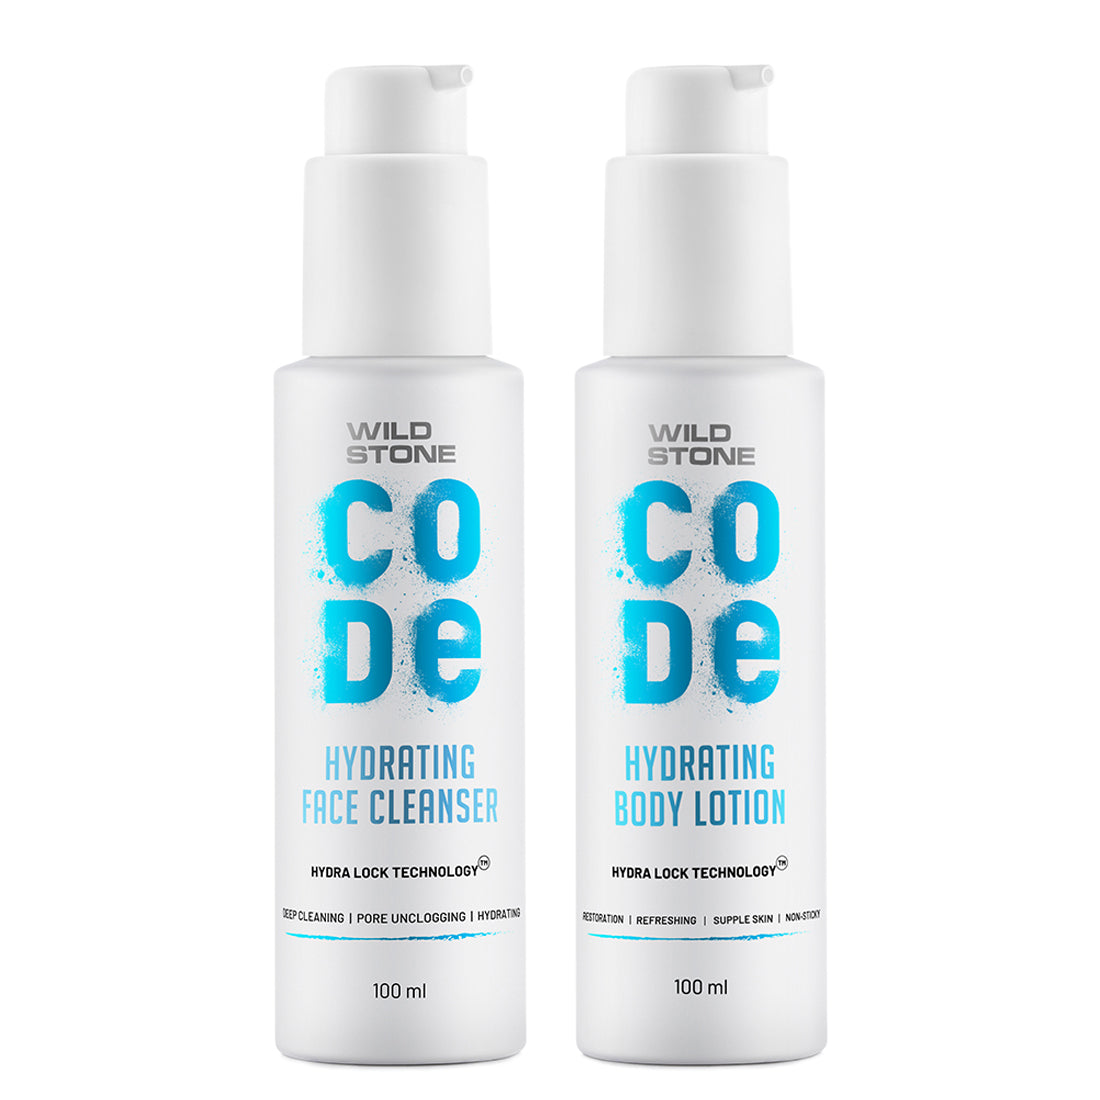 Wild Stone CODE Hydra Face Cleanser & Body Lotion, 100ml each